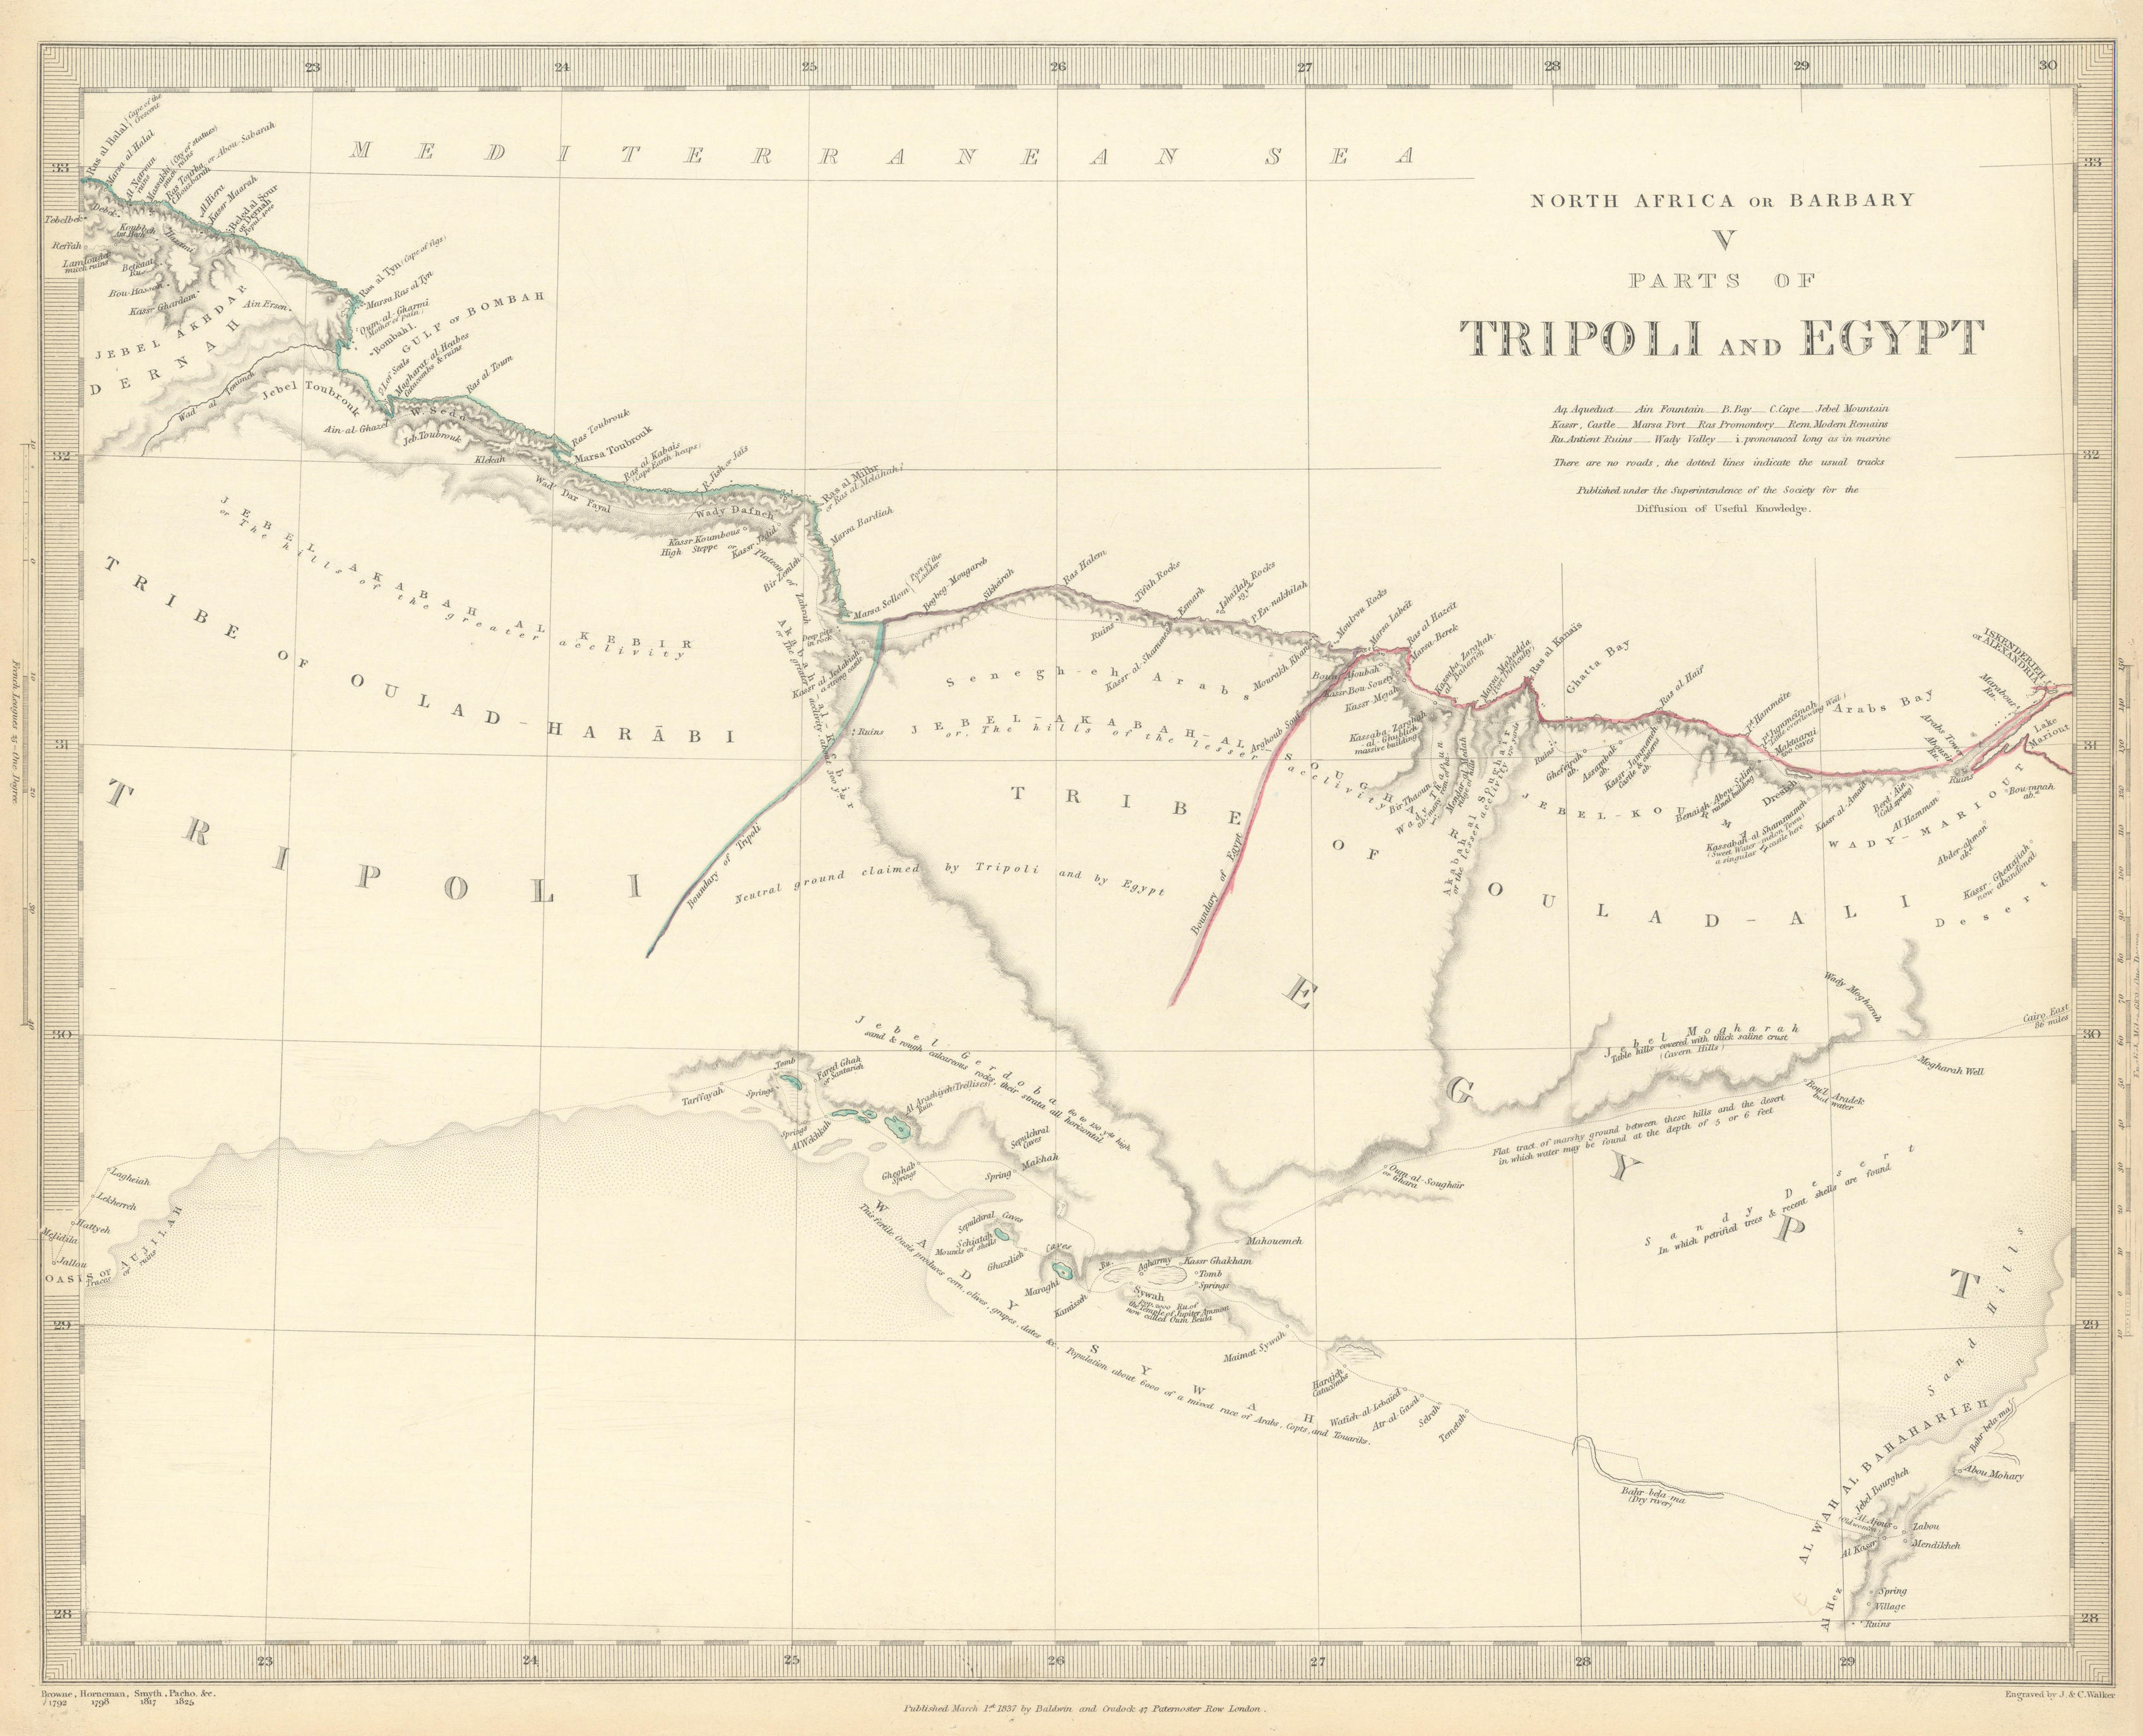 NORTH AFRICA BARBARY. Parts of Tripoli (Libya) & Egypt. Tribes. SDUK 1844 map